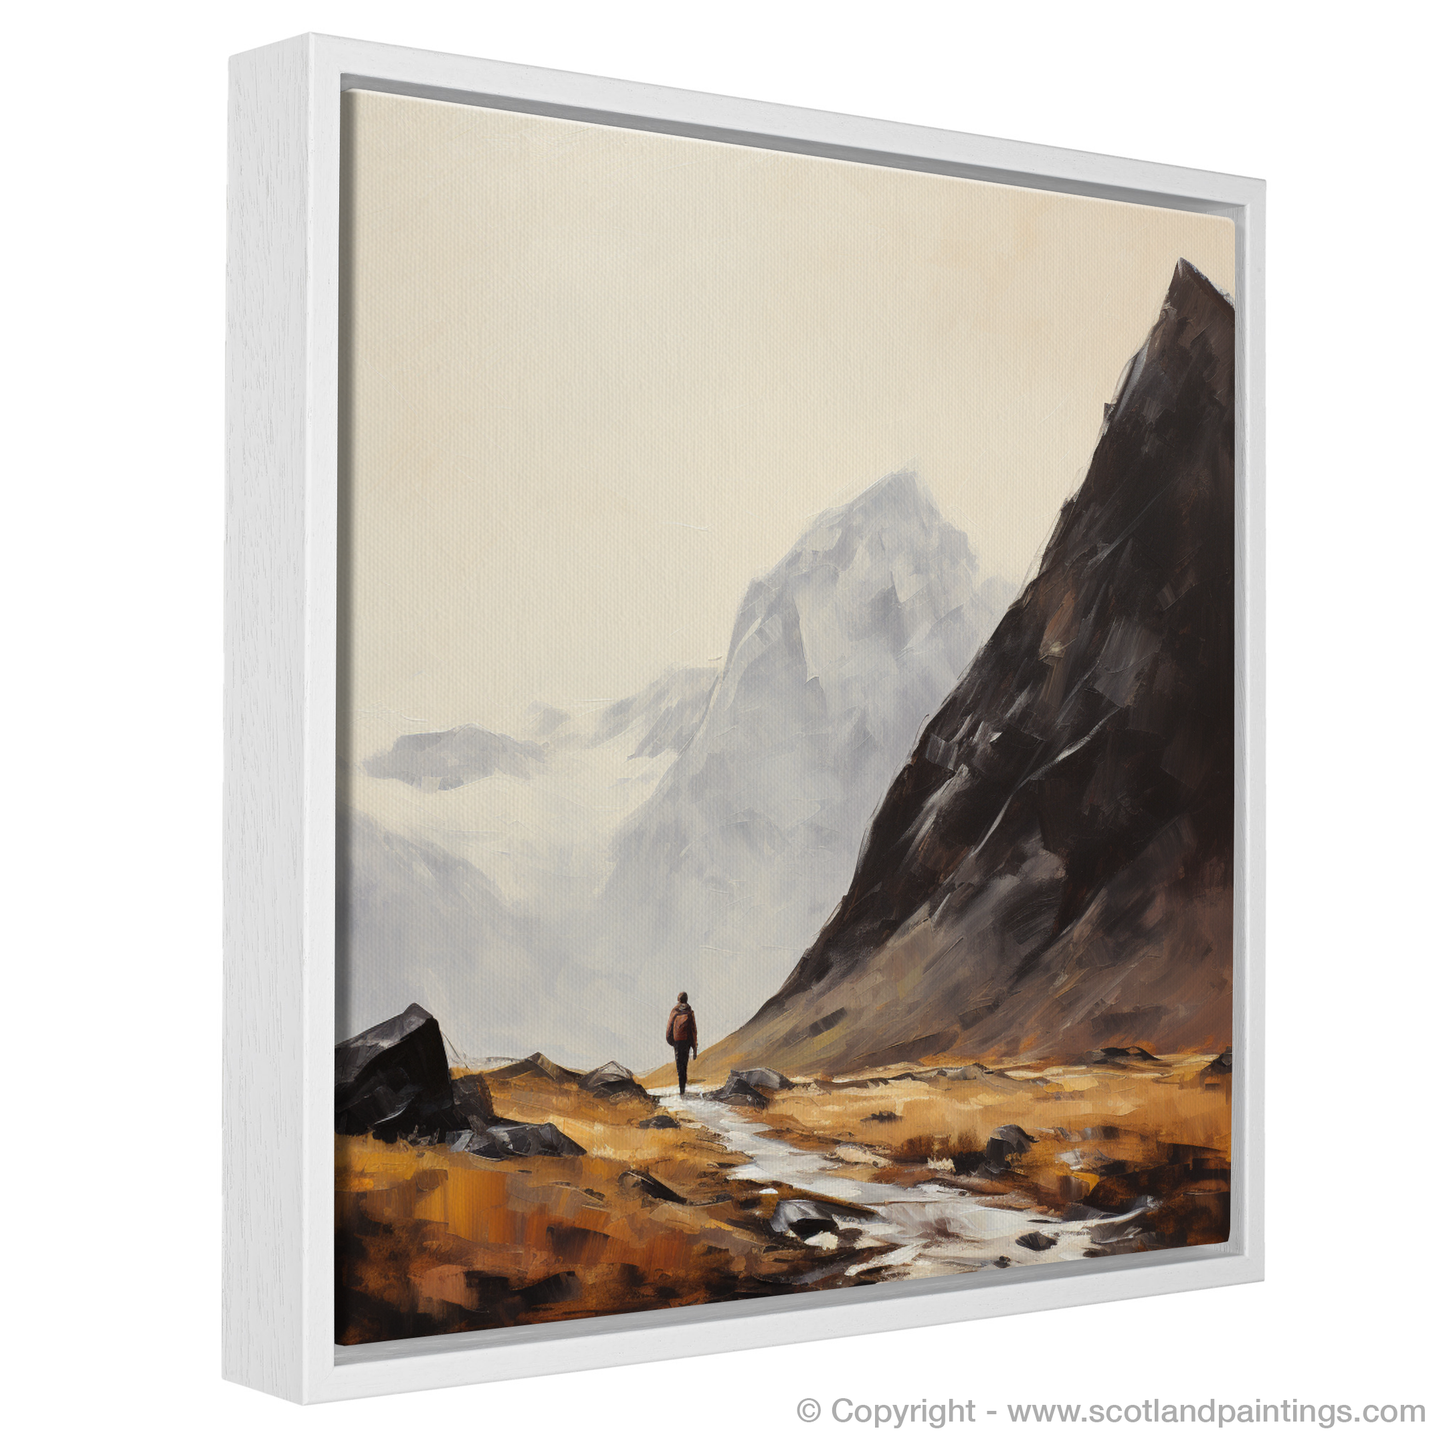 Painting and Art Print of A lone hiker in Glencoe entitled "Solitary Hiker: An Expressionist Ode to Glencoe's Wild Beauty".